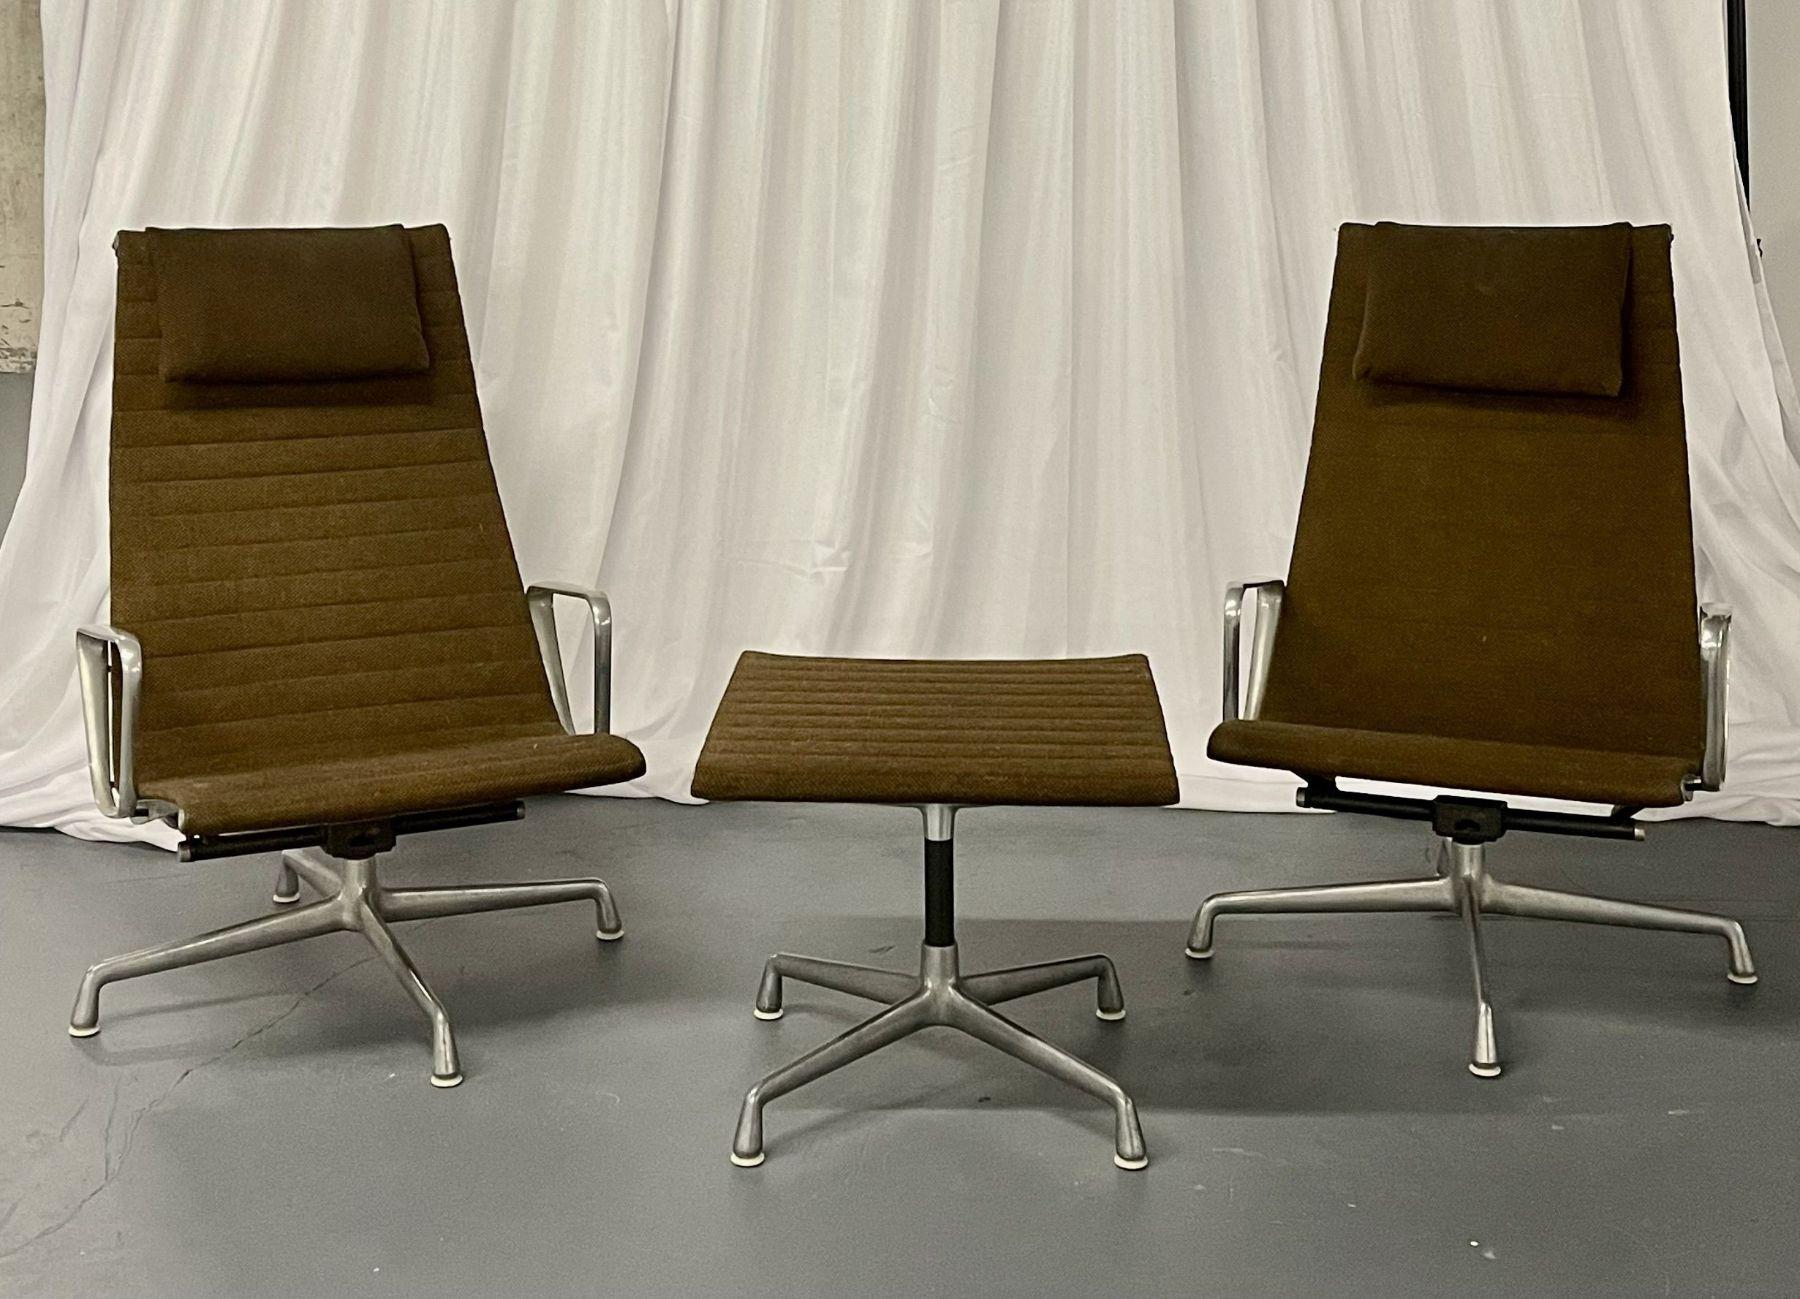 Mid-Century Modern Charles & Ray Eames swivel chairs, ottoman, seating group

Mid-Century Modern seating group having a pair of arm swivel chairs and a matching side table or ottoman. The swivel chairs are stamped 